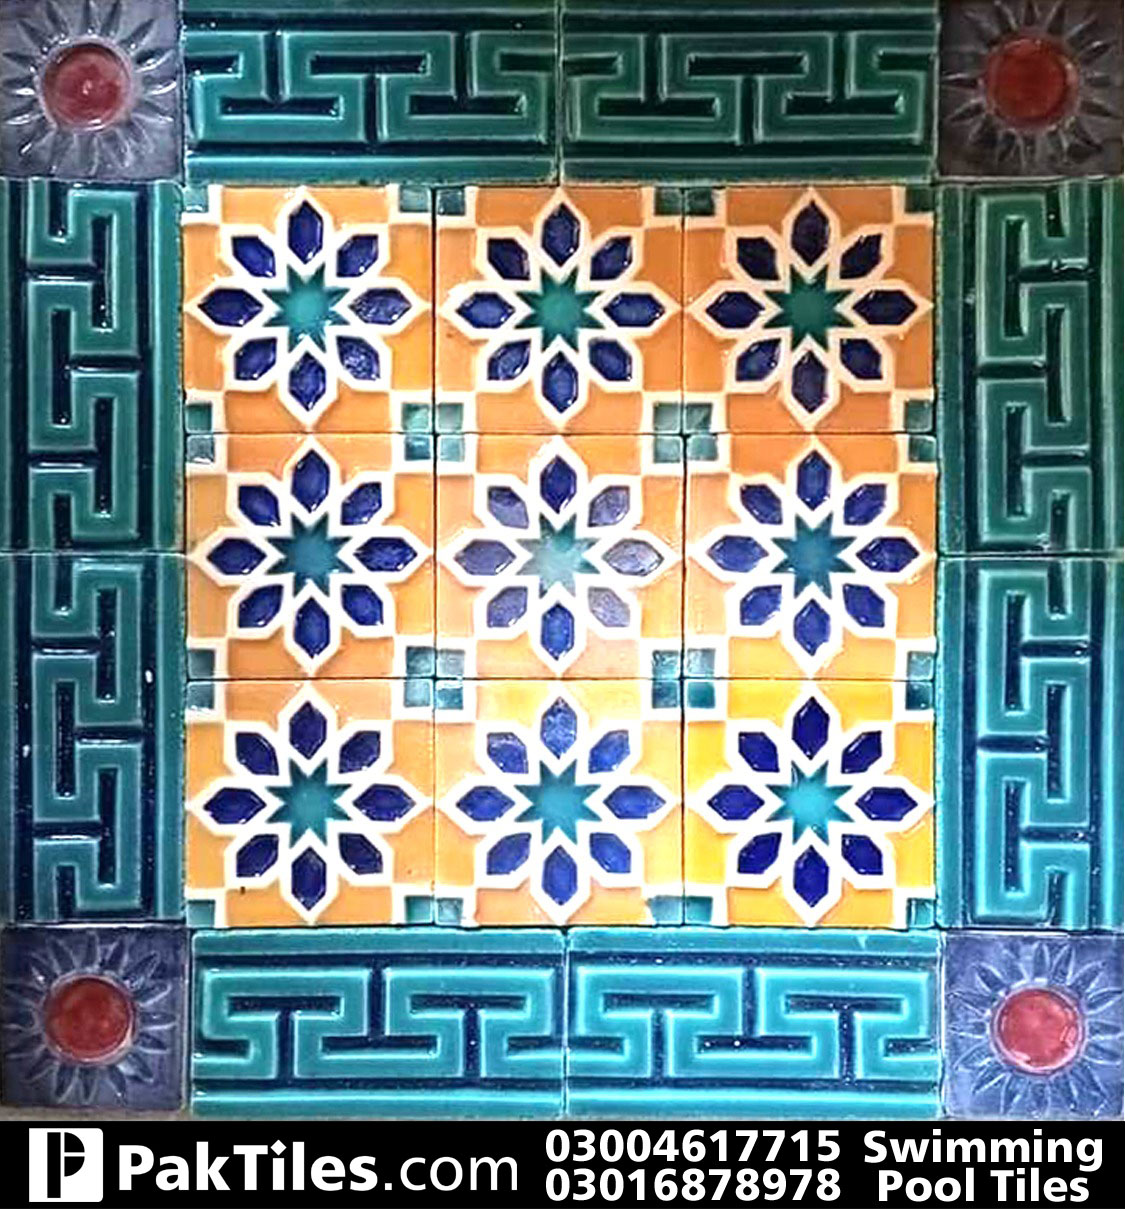 Swimming pool tiles store in faisalabad